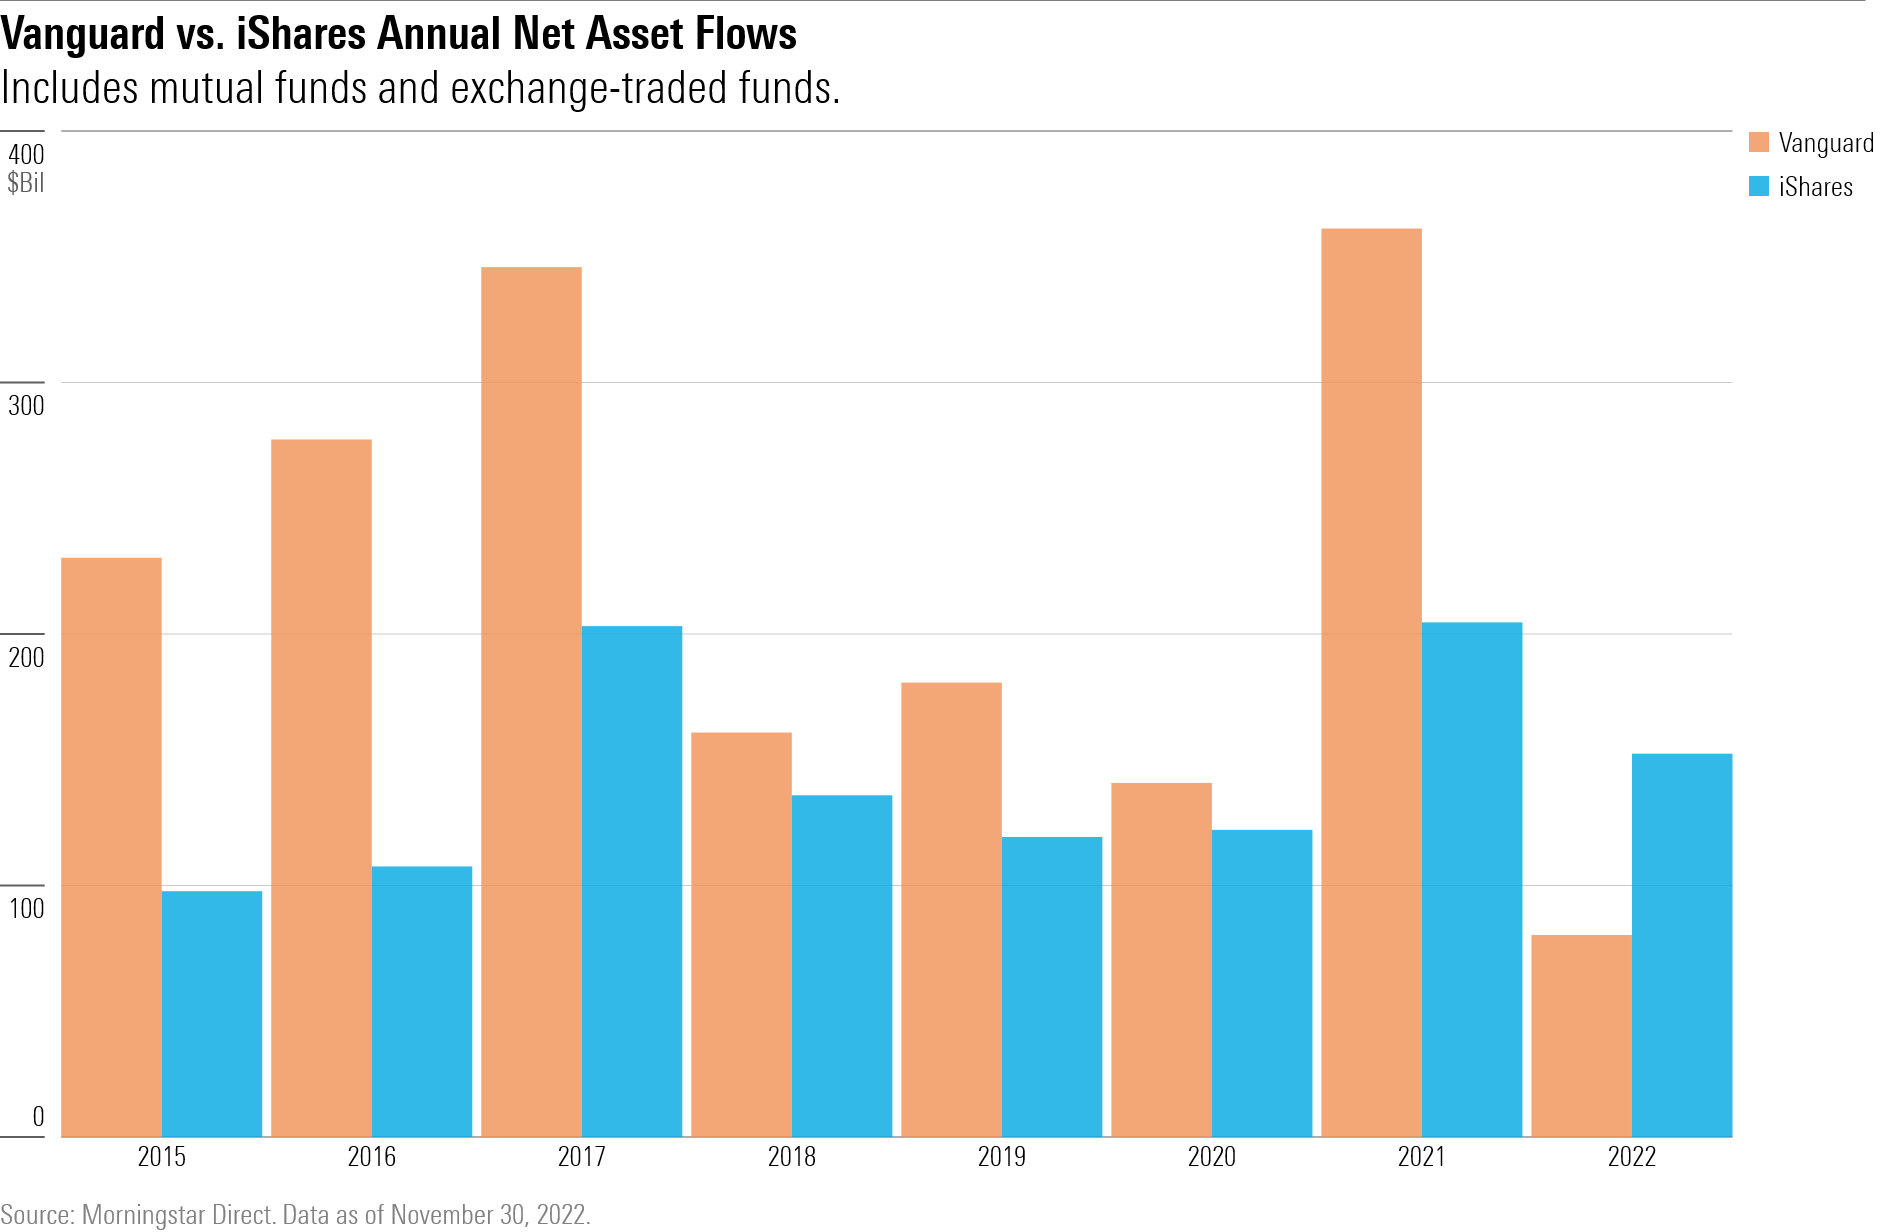 Bar chart showing the net assets of Vanguard and iShares mutual fund and exchange-traded funds